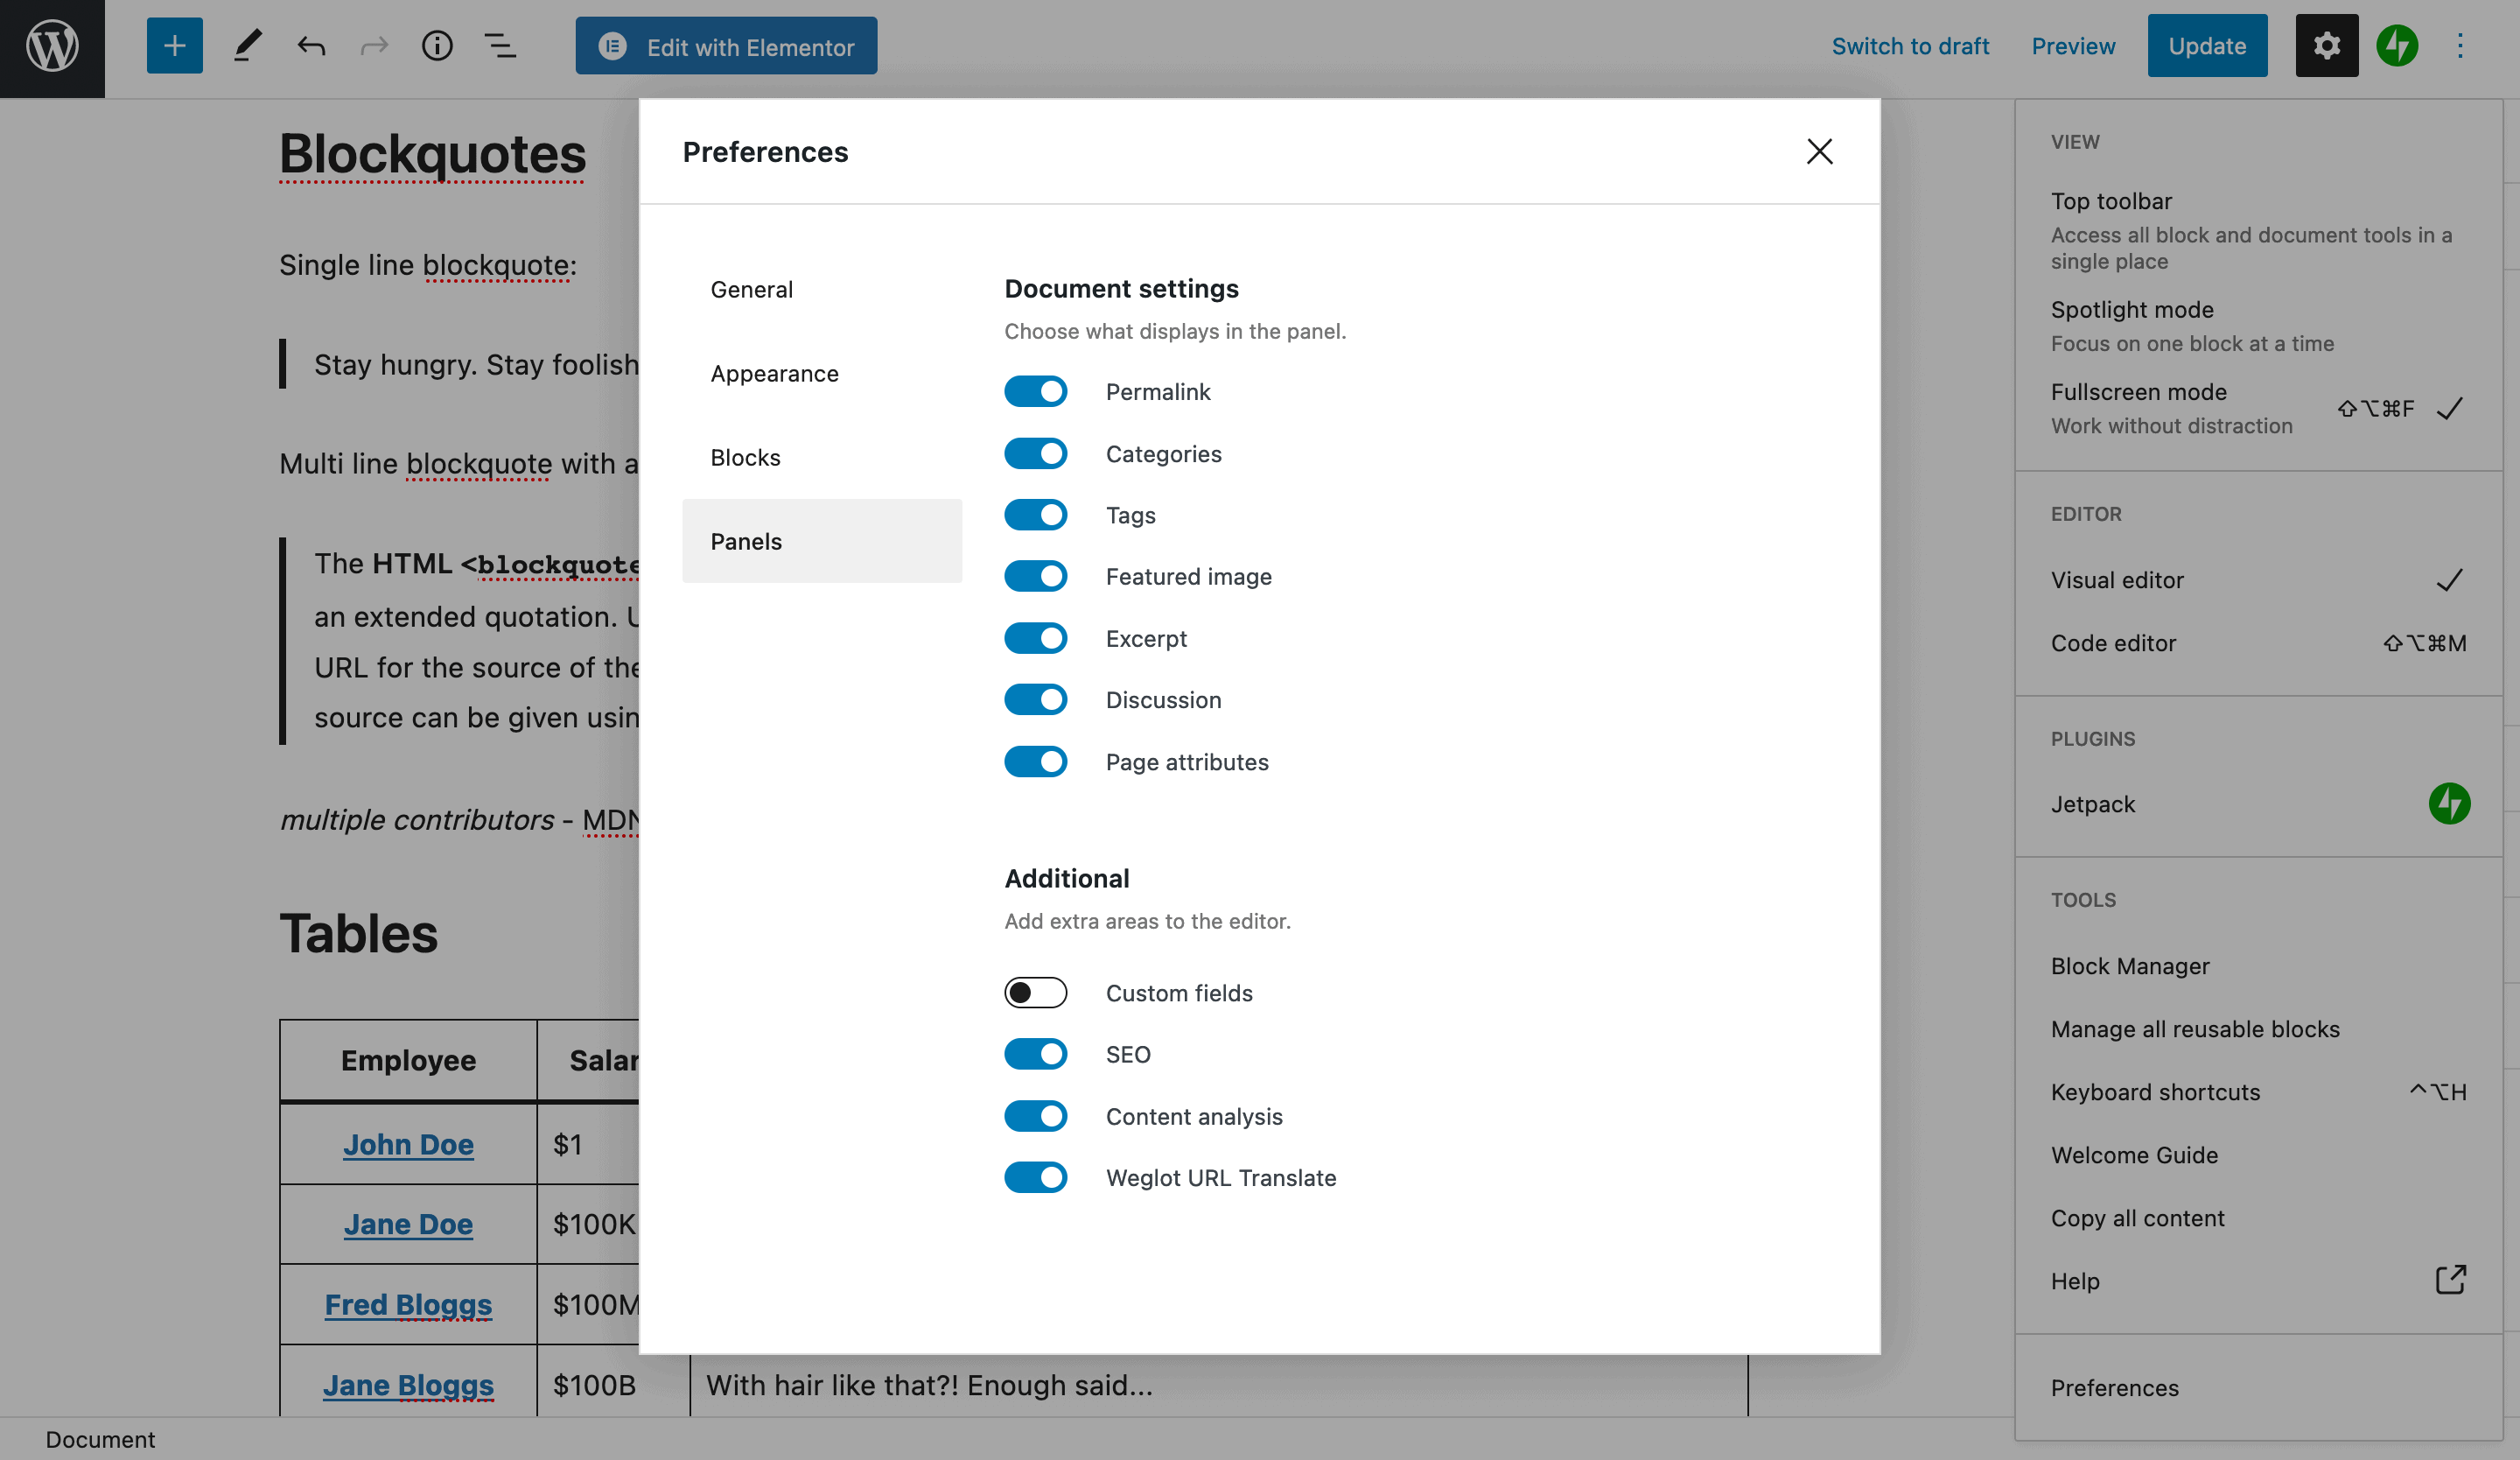 The Preferences Panel.